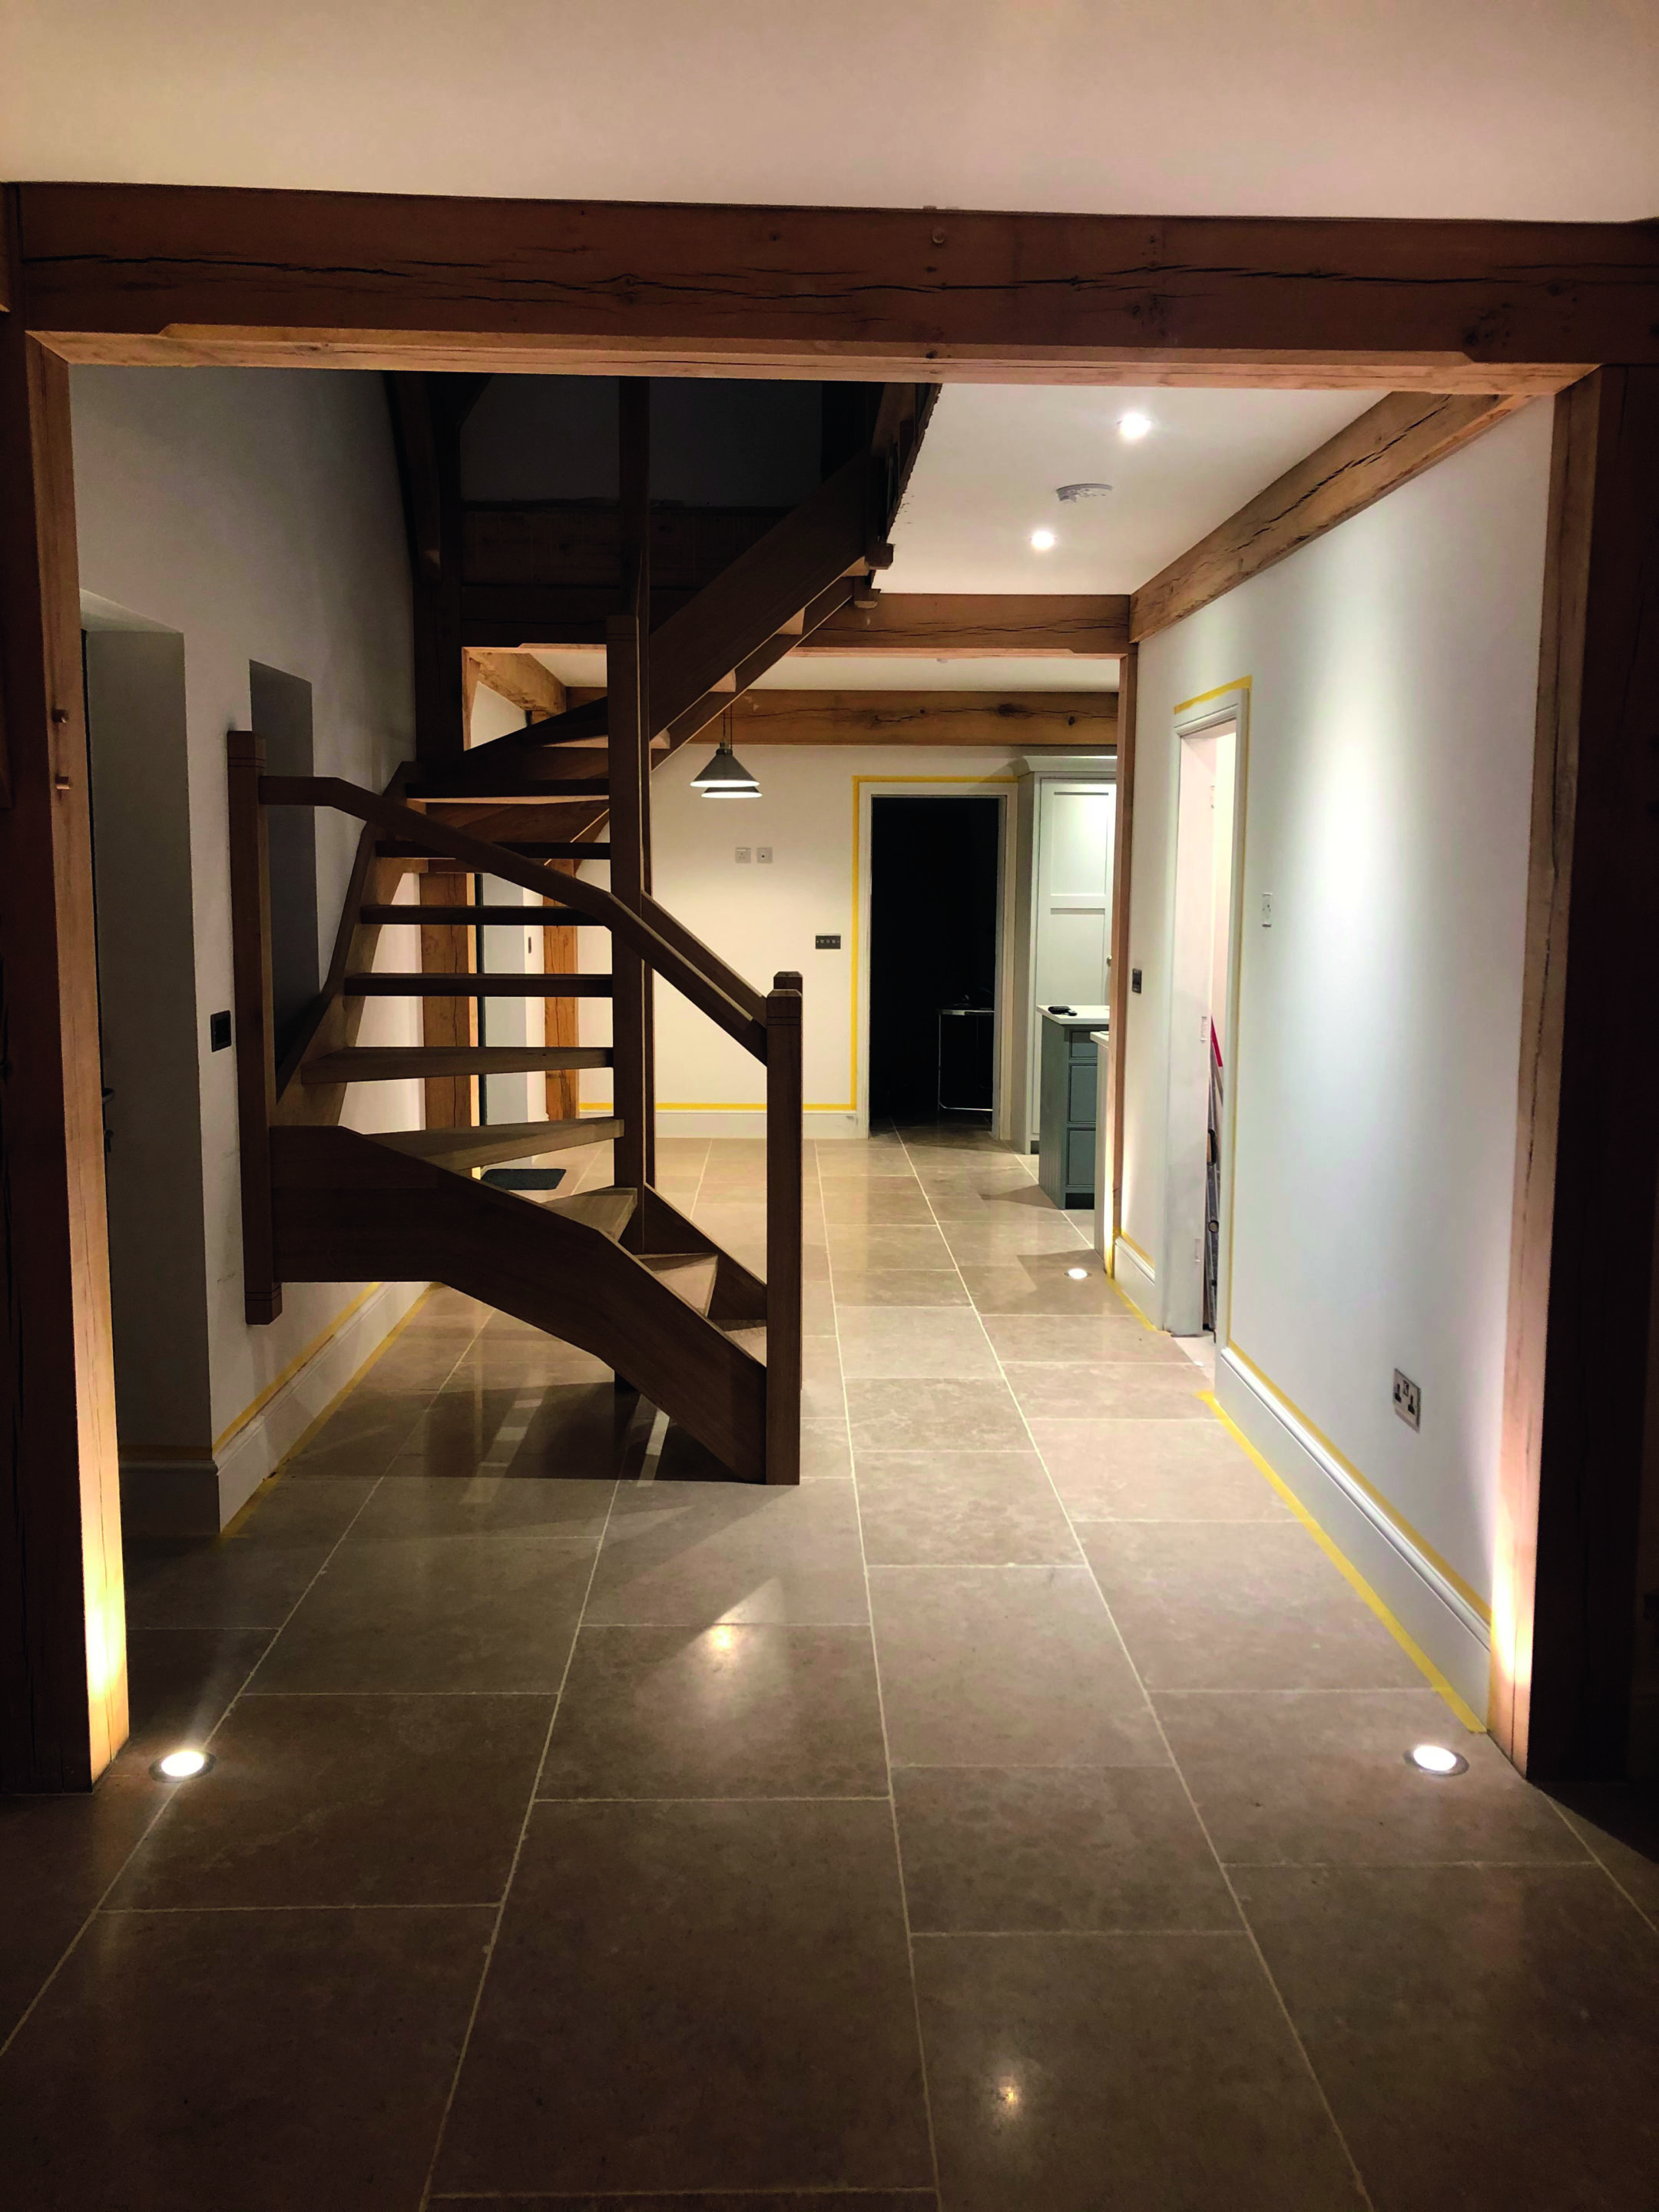 Hallway with flagstones and stairs